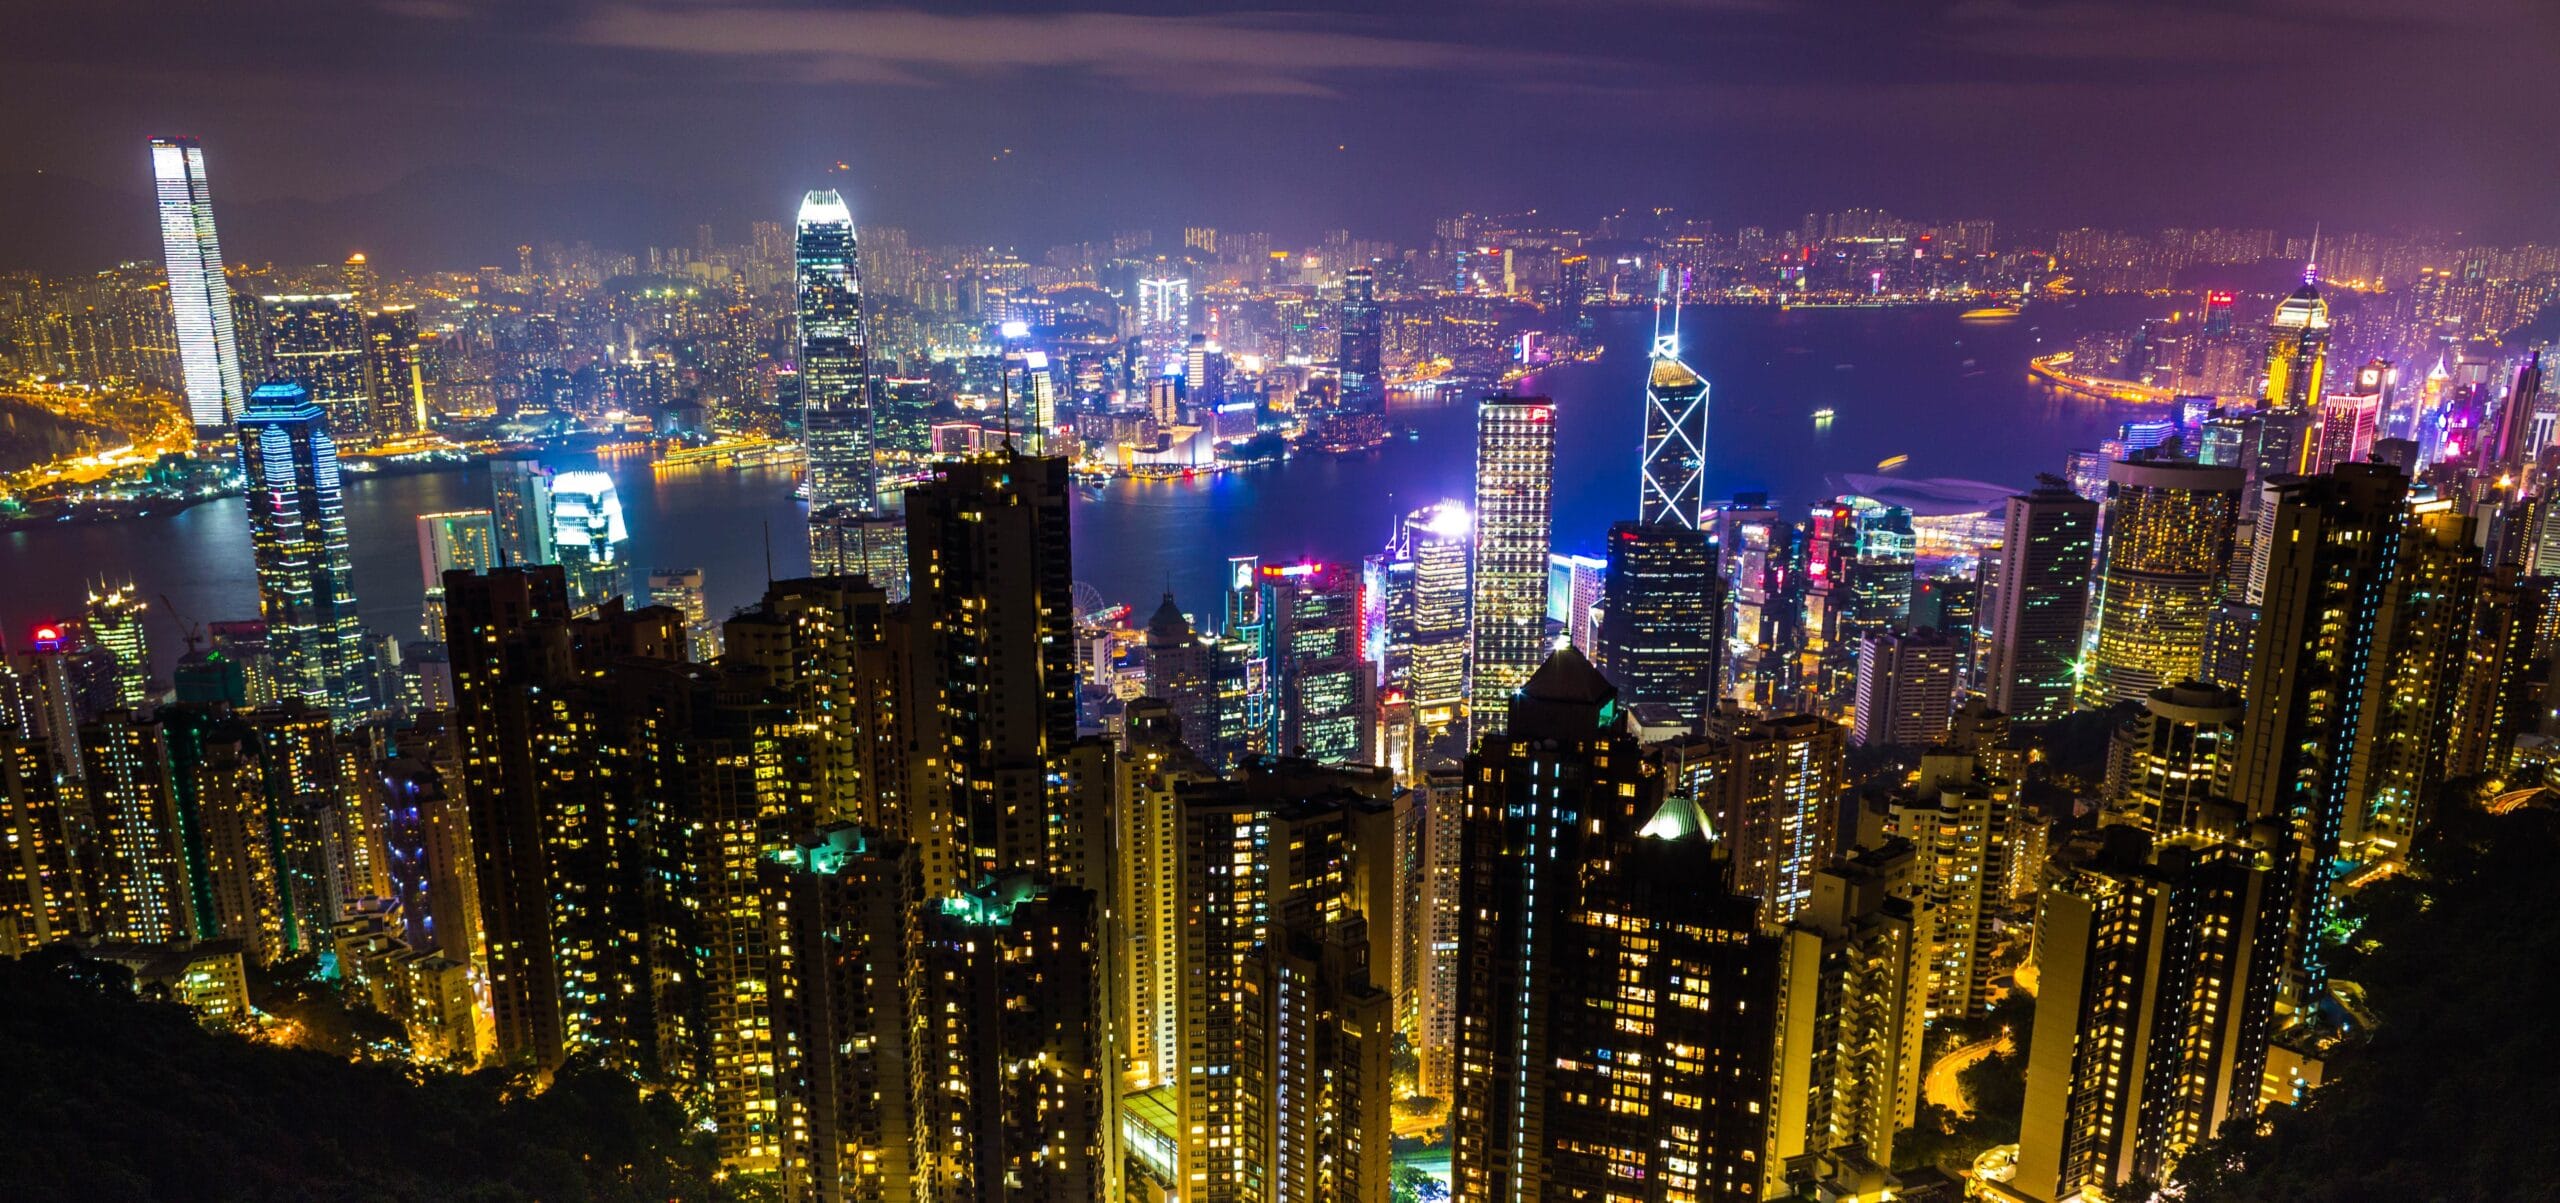 9 Things About Hong Kong You Didn’t Know